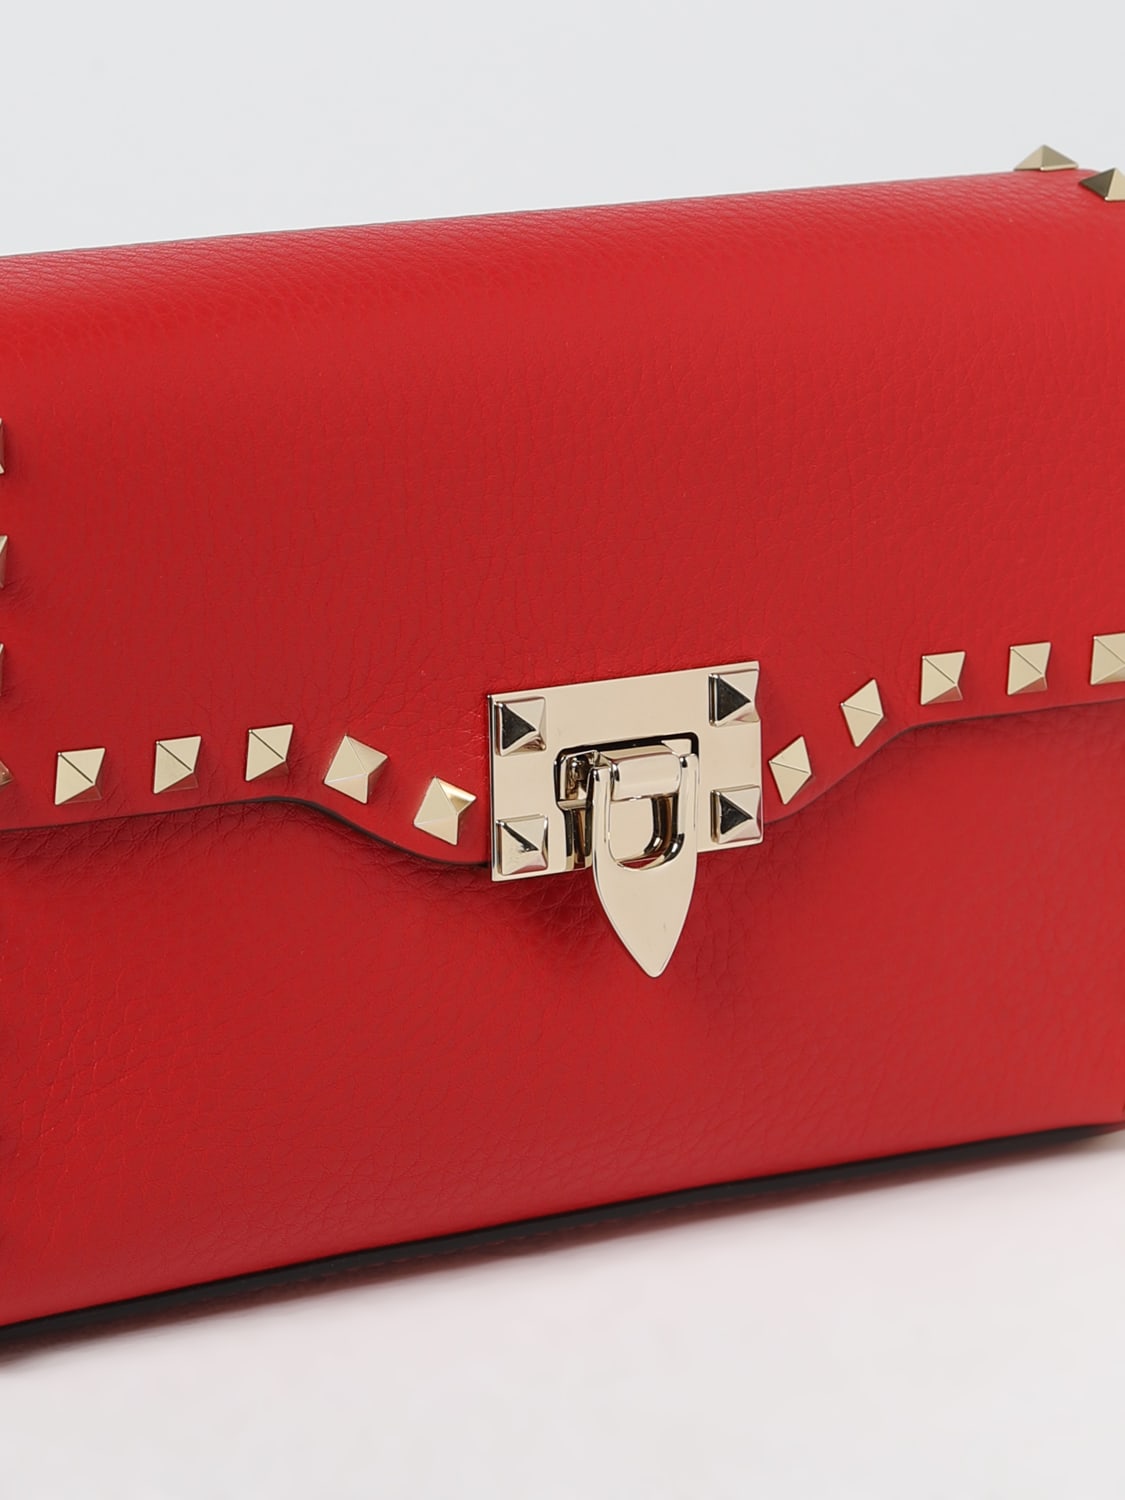 Valentino Garavani: Red Bags now up to −74%